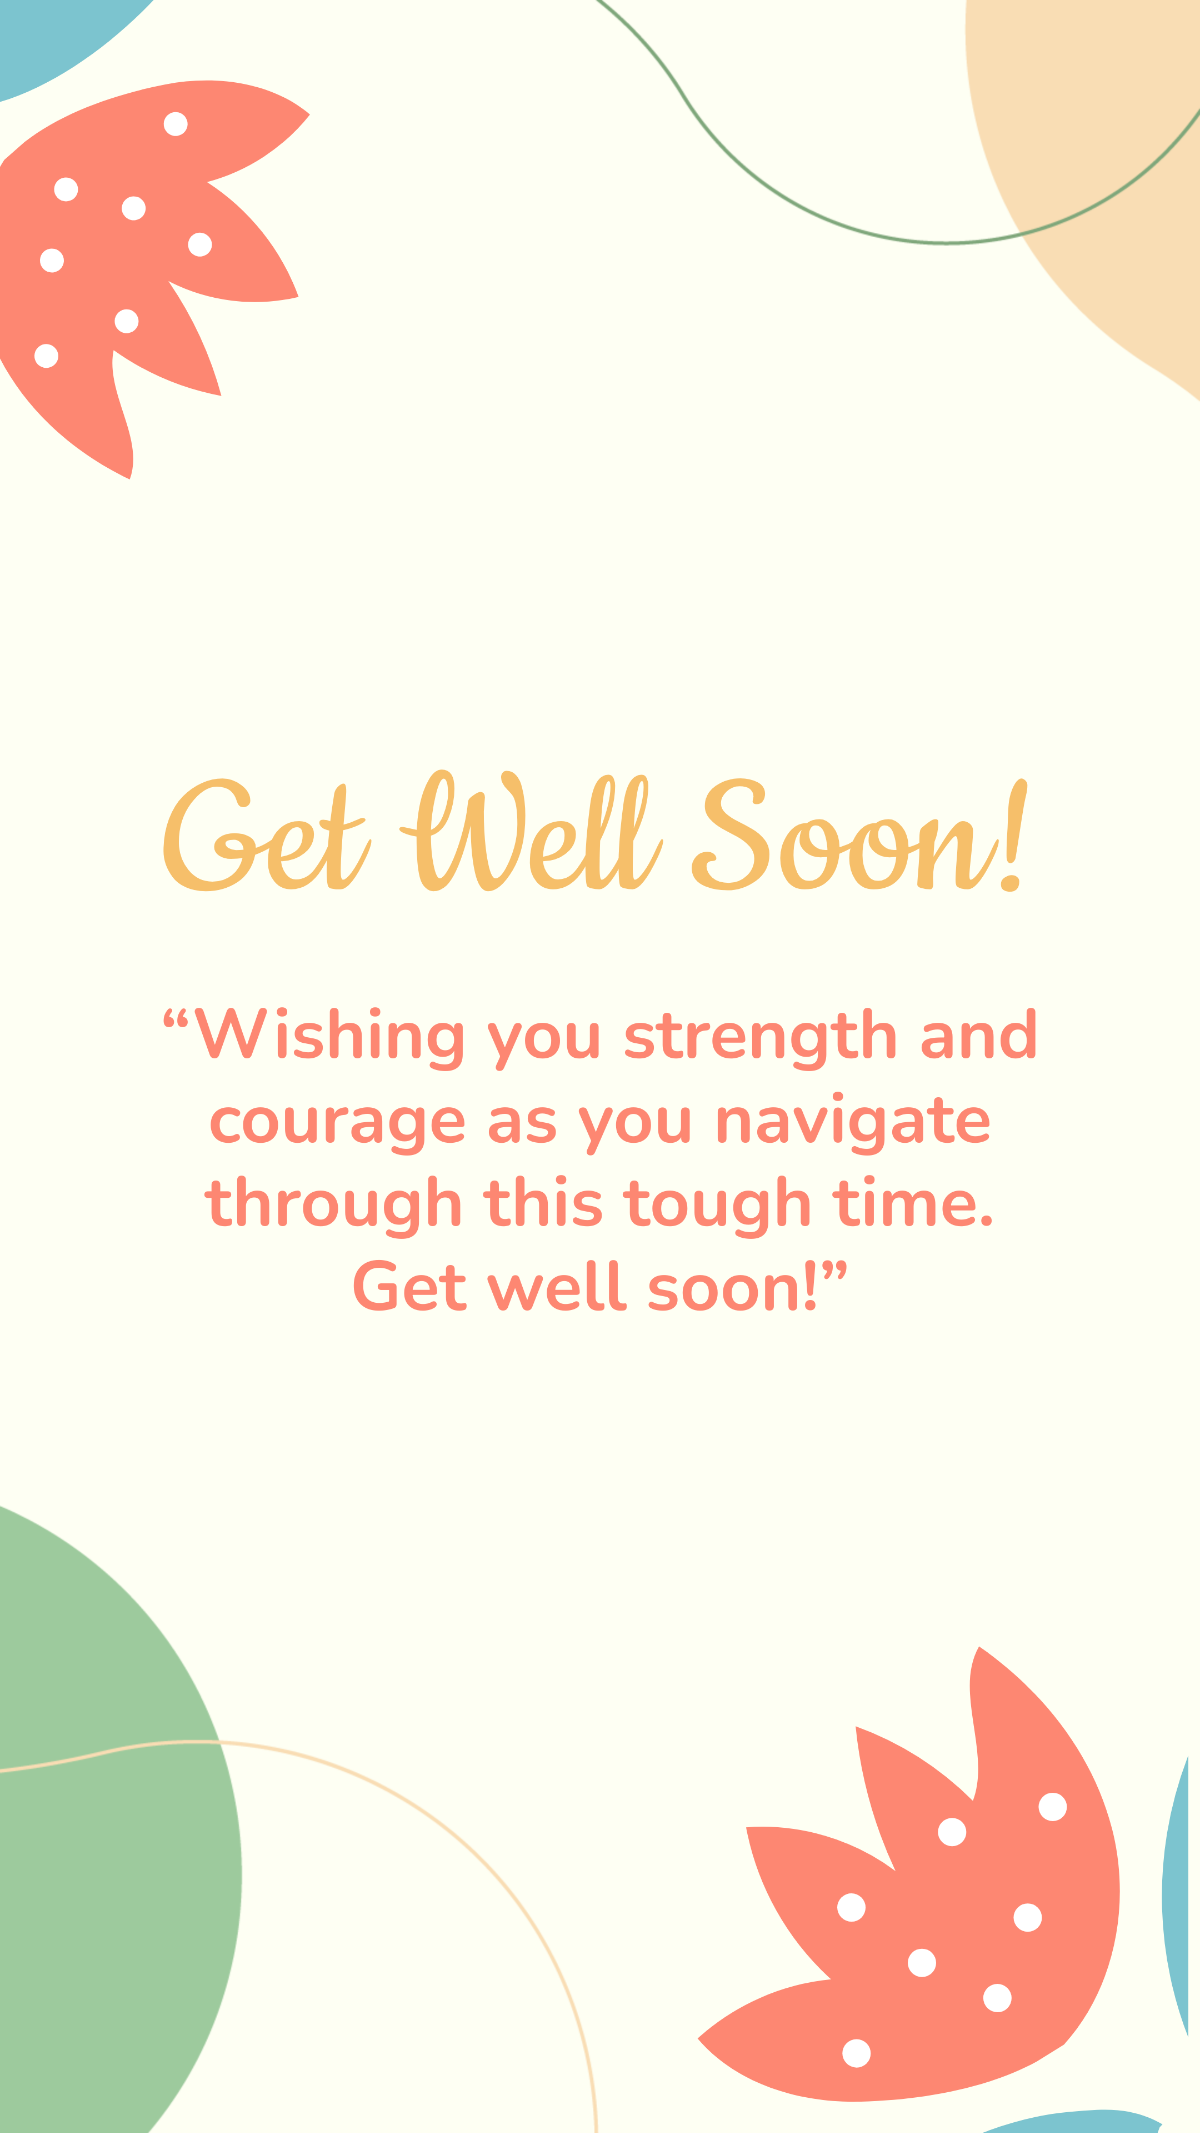 Get Well Soon Inspirational Quote Template